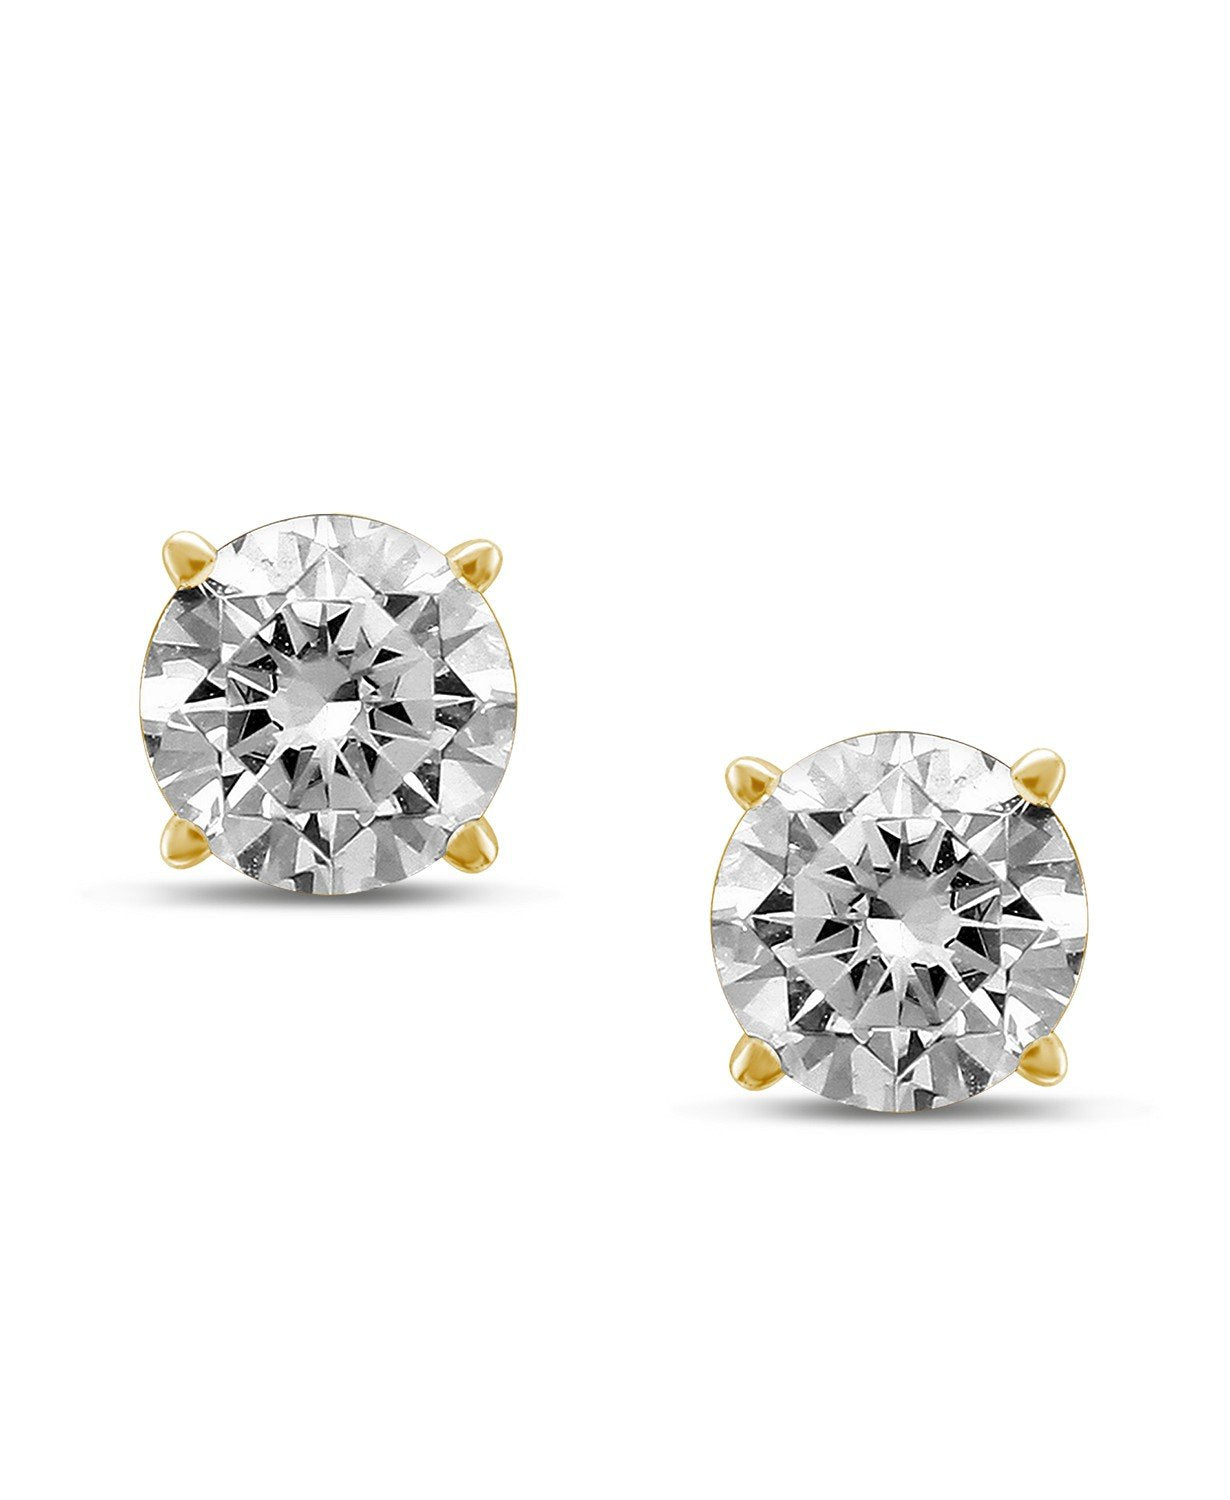 Diamond Stud Earrings in 14k White Gold or Yellow Gold – FC Creations INC